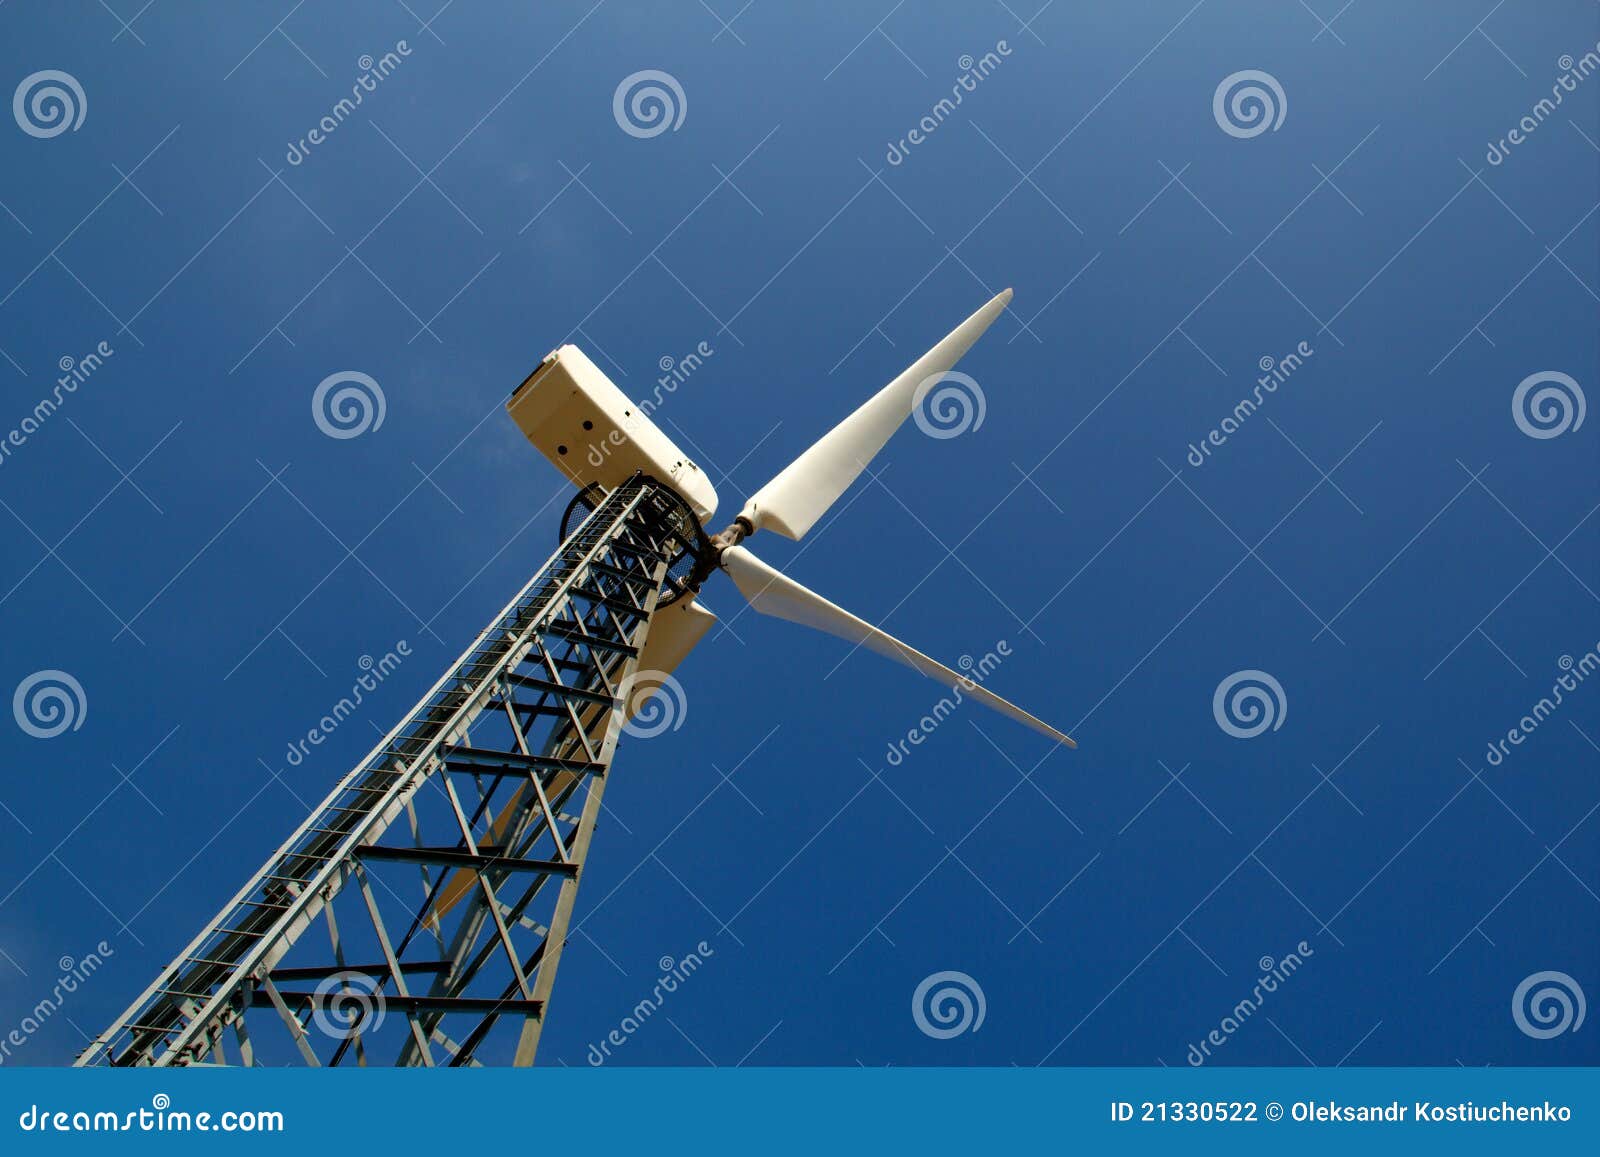 the wind generator against the blue sky